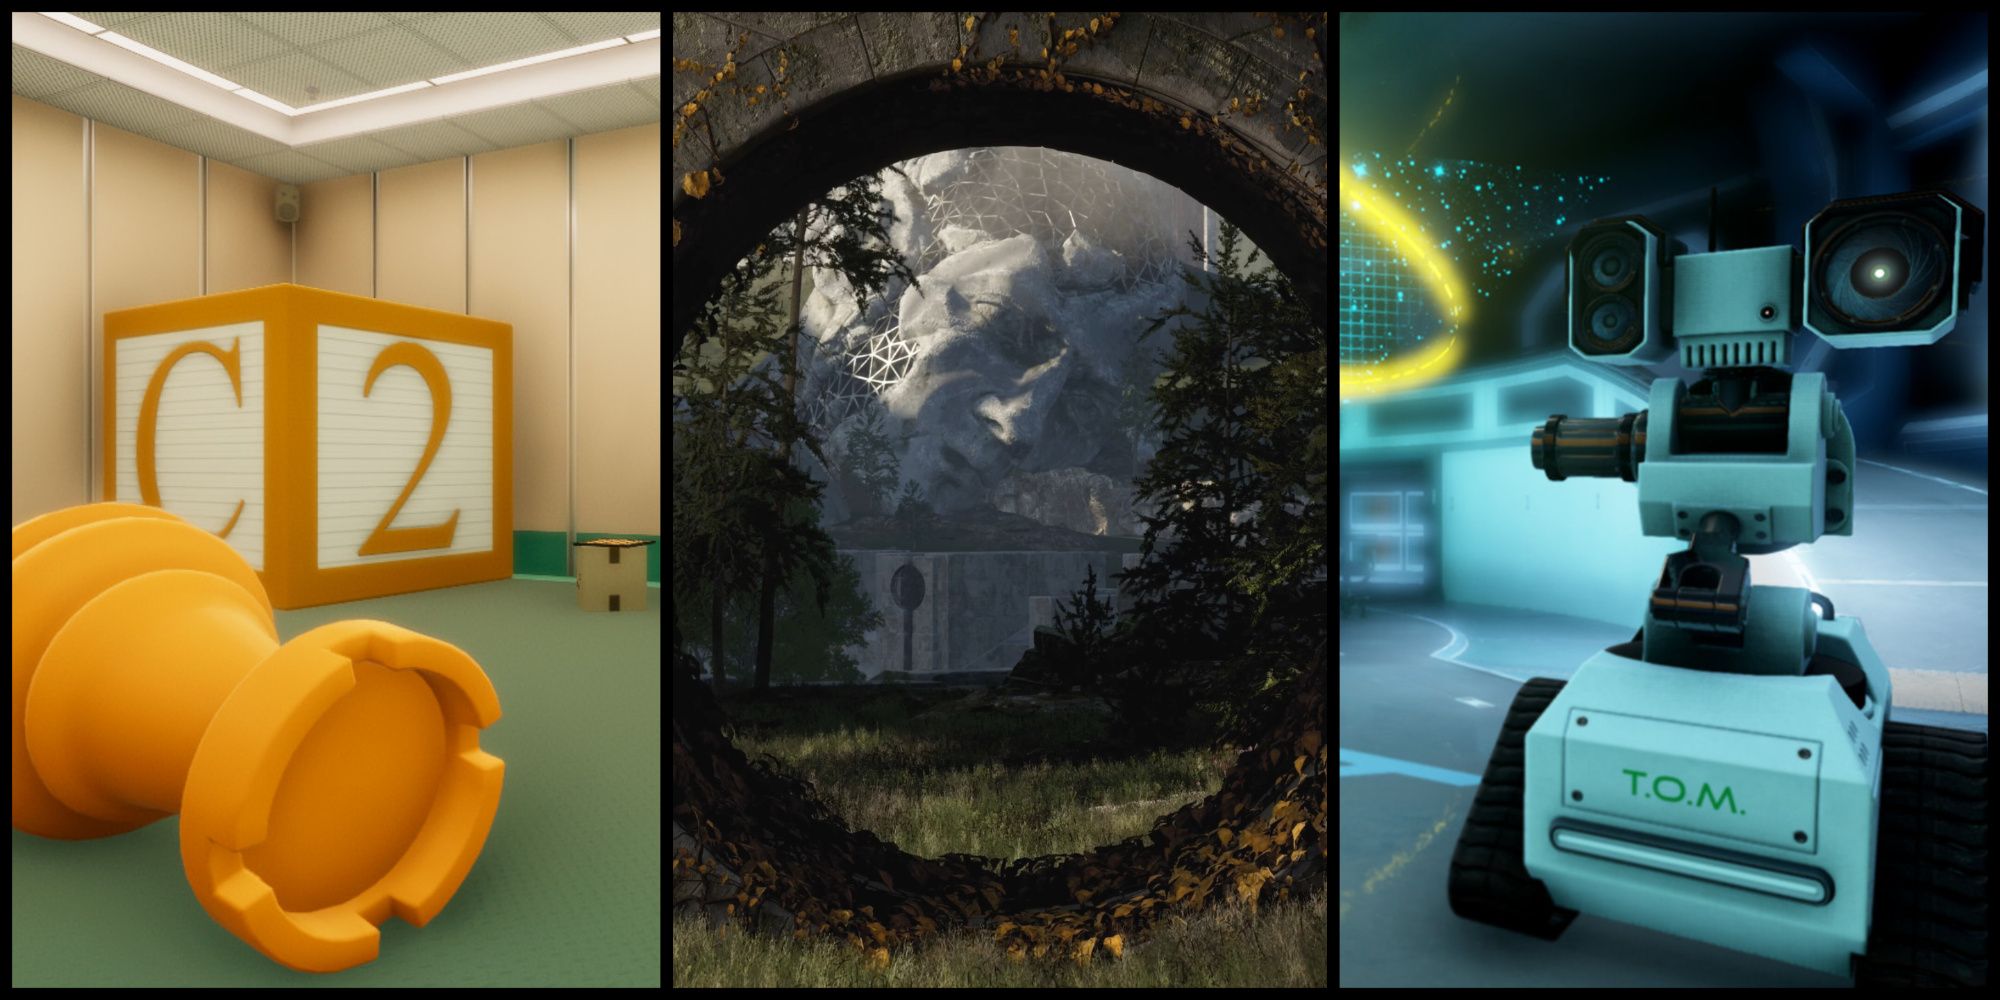 Pictures from Superliminal, The Talos Principle 2, and The Turing Test